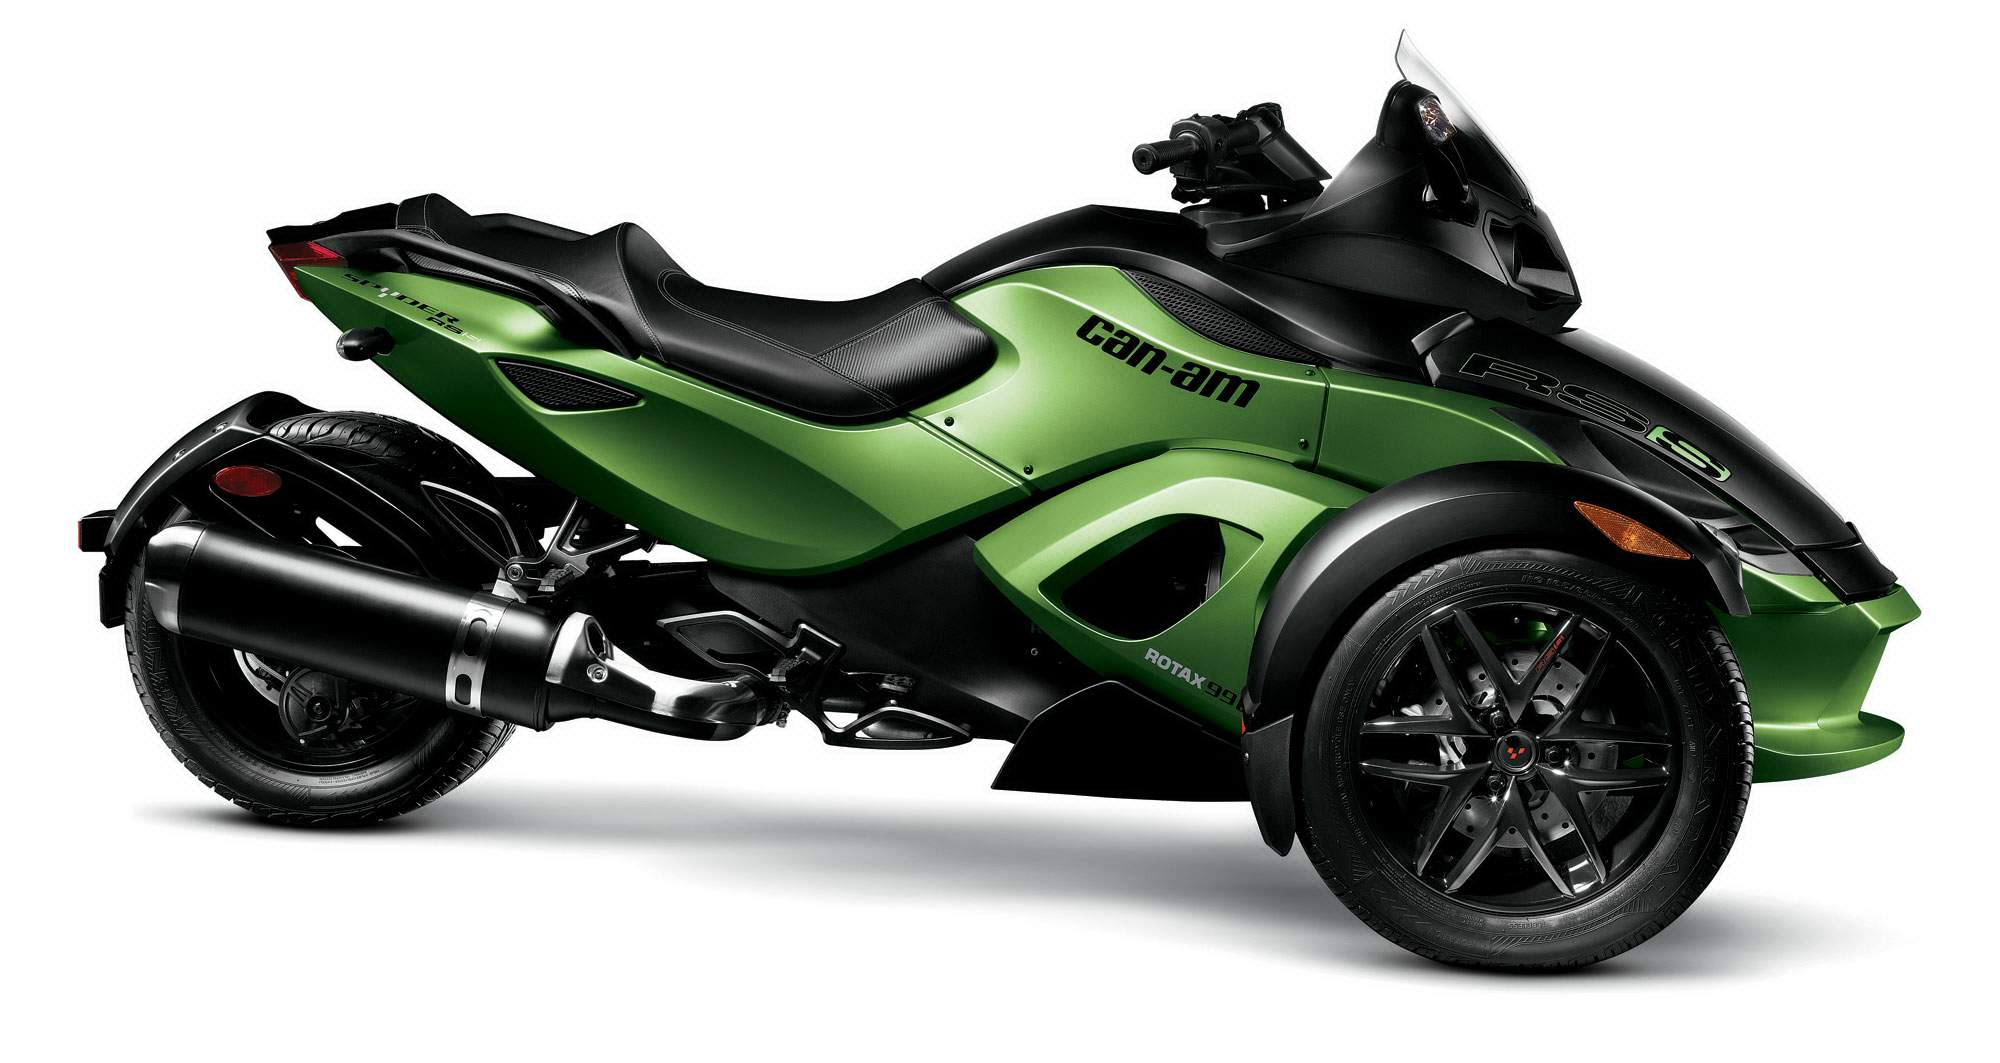 2010 Can-Am Spyder RS specifications and pictures